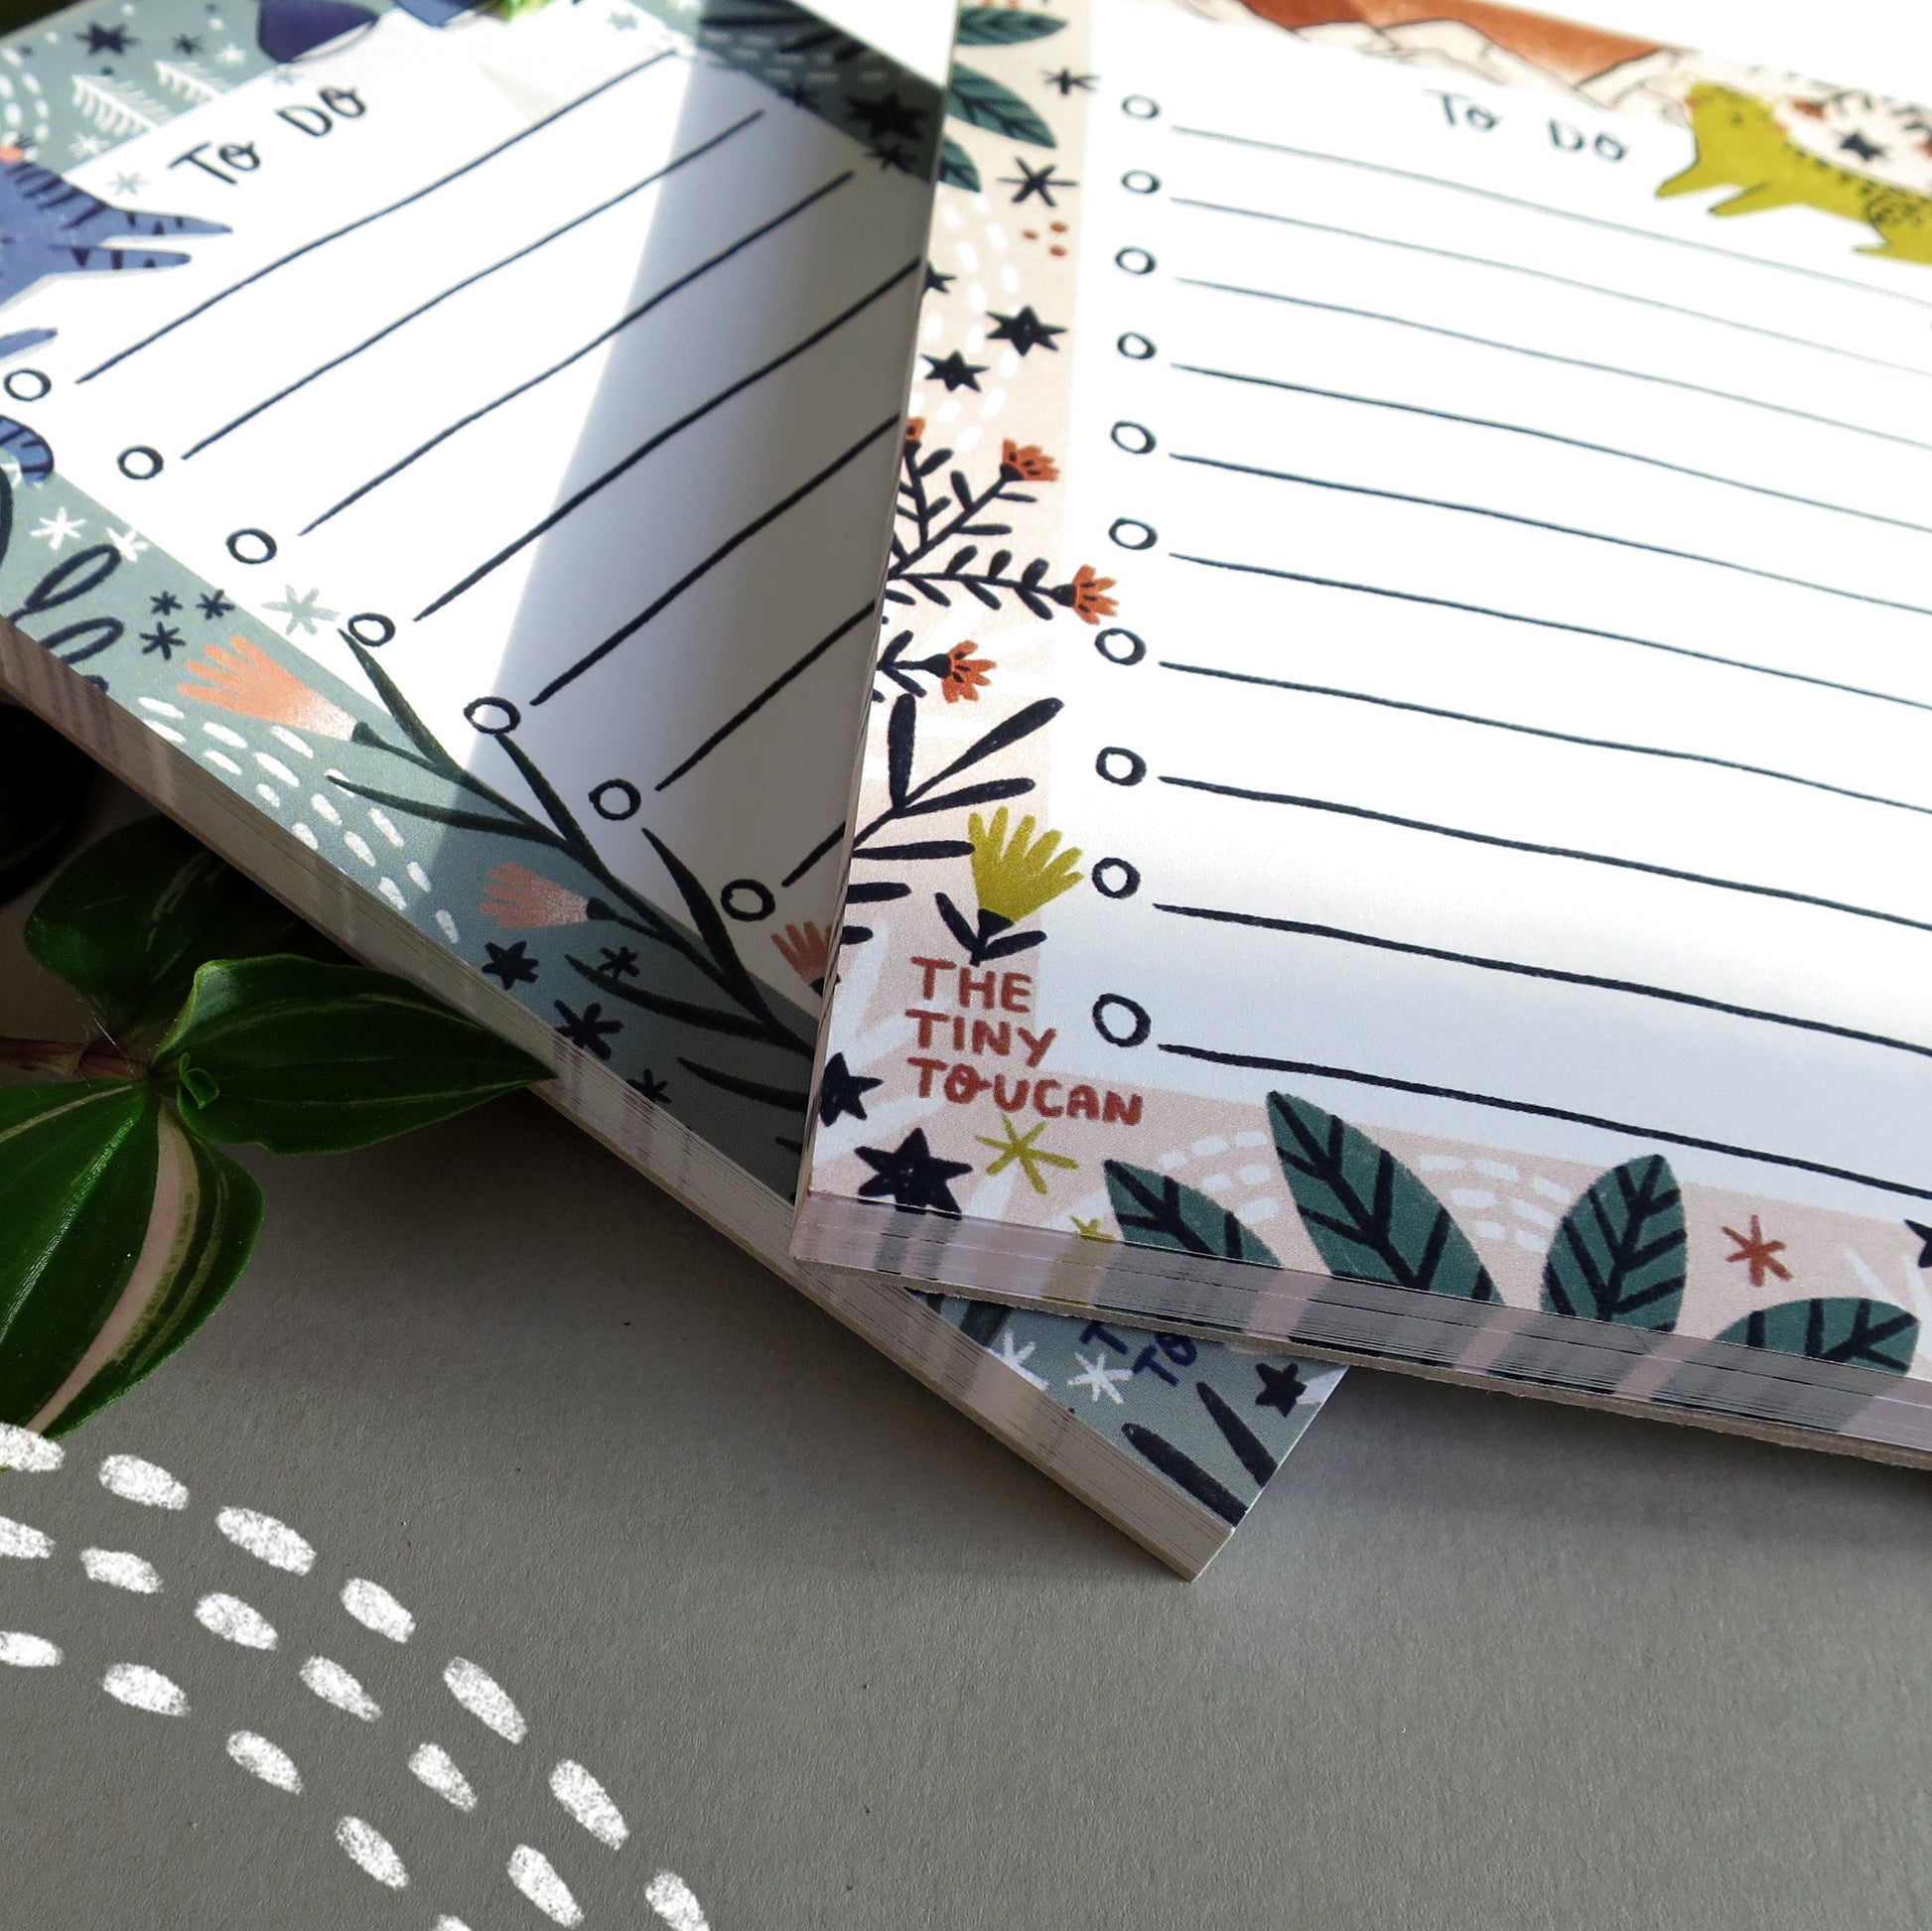 DAYTIME TO-DO  List. A6. Magnetic Option. Fsc Certified responsible paper. Made in the Uk. Memo. Cute Eco Stationery. Sustainable Gifting.